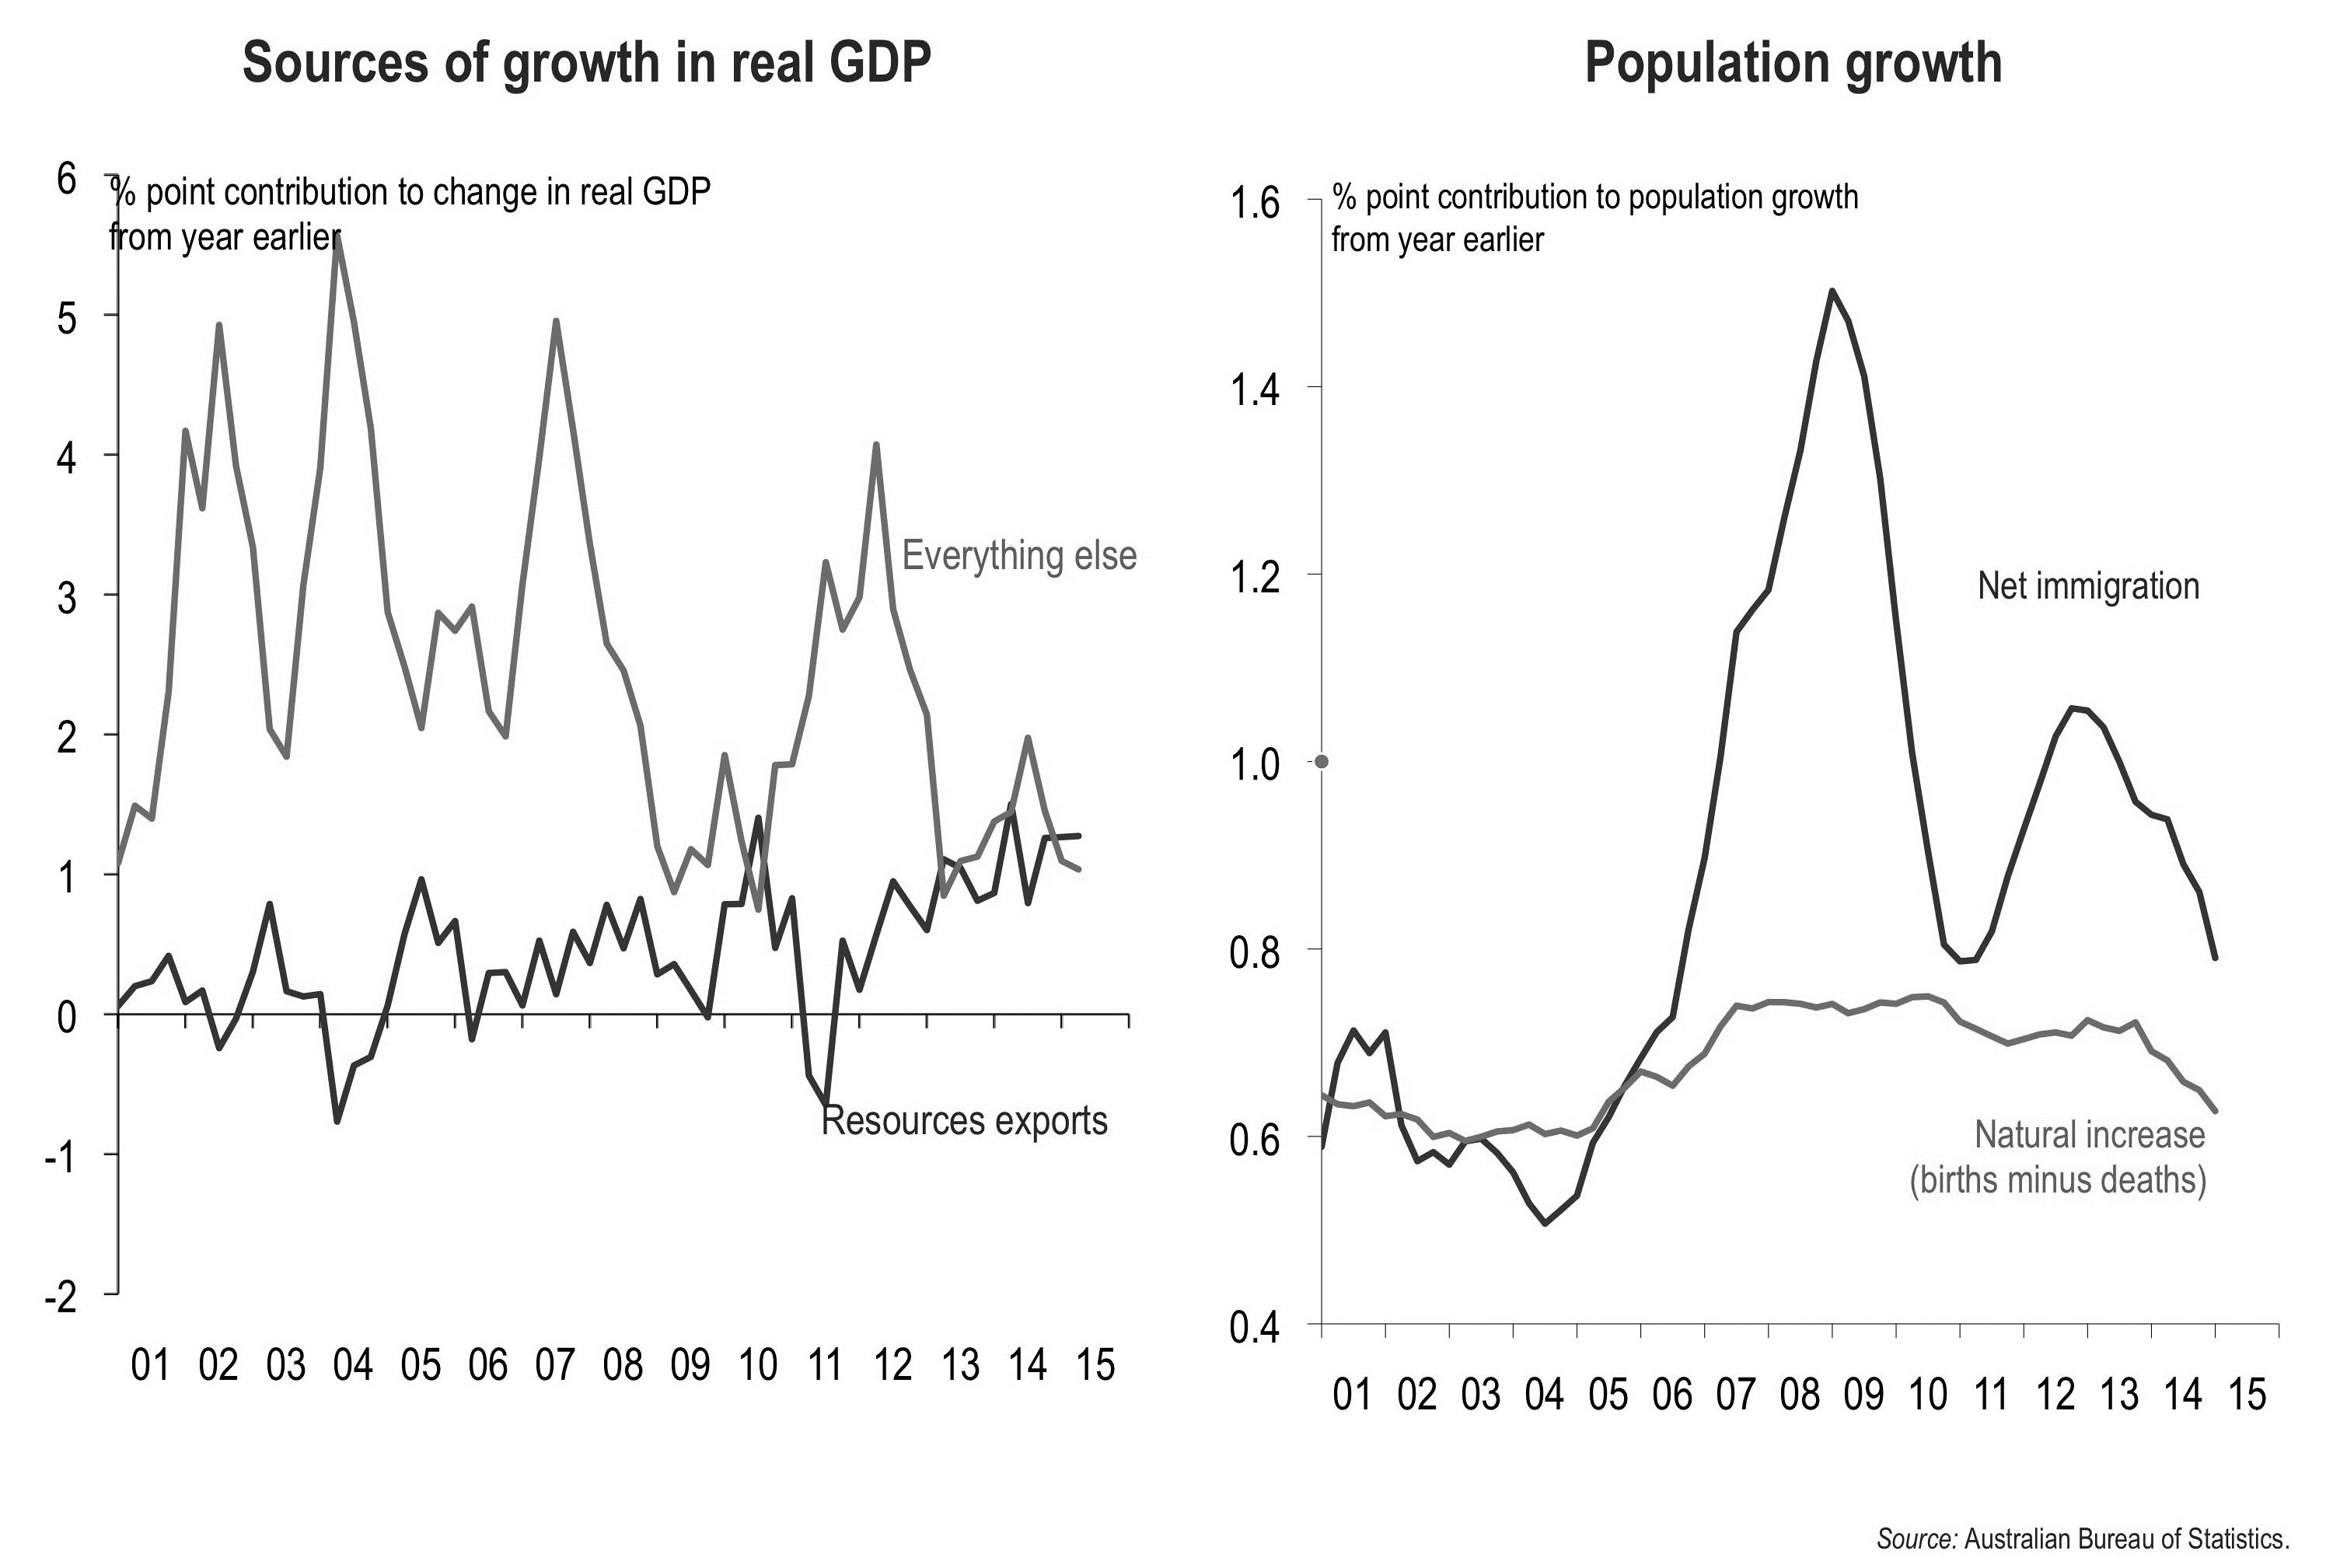 Figure 11 (a) Australia’s source of growth in real GDP and (b) Australia’s population growth.